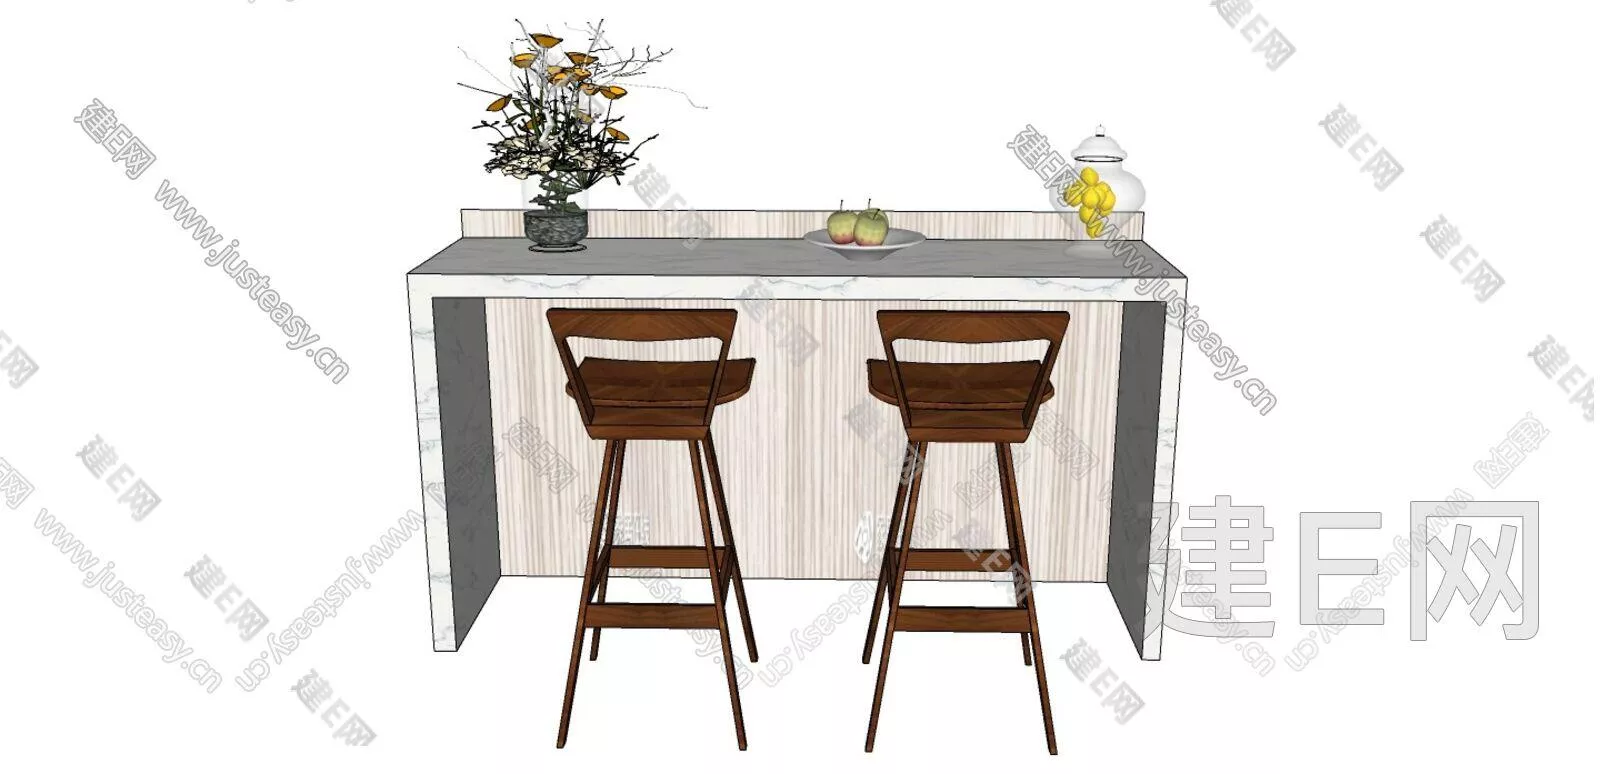 CHINESE BAR COUNTER - SKETCHUP 3D MODEL - ENSCAPE - 105594995